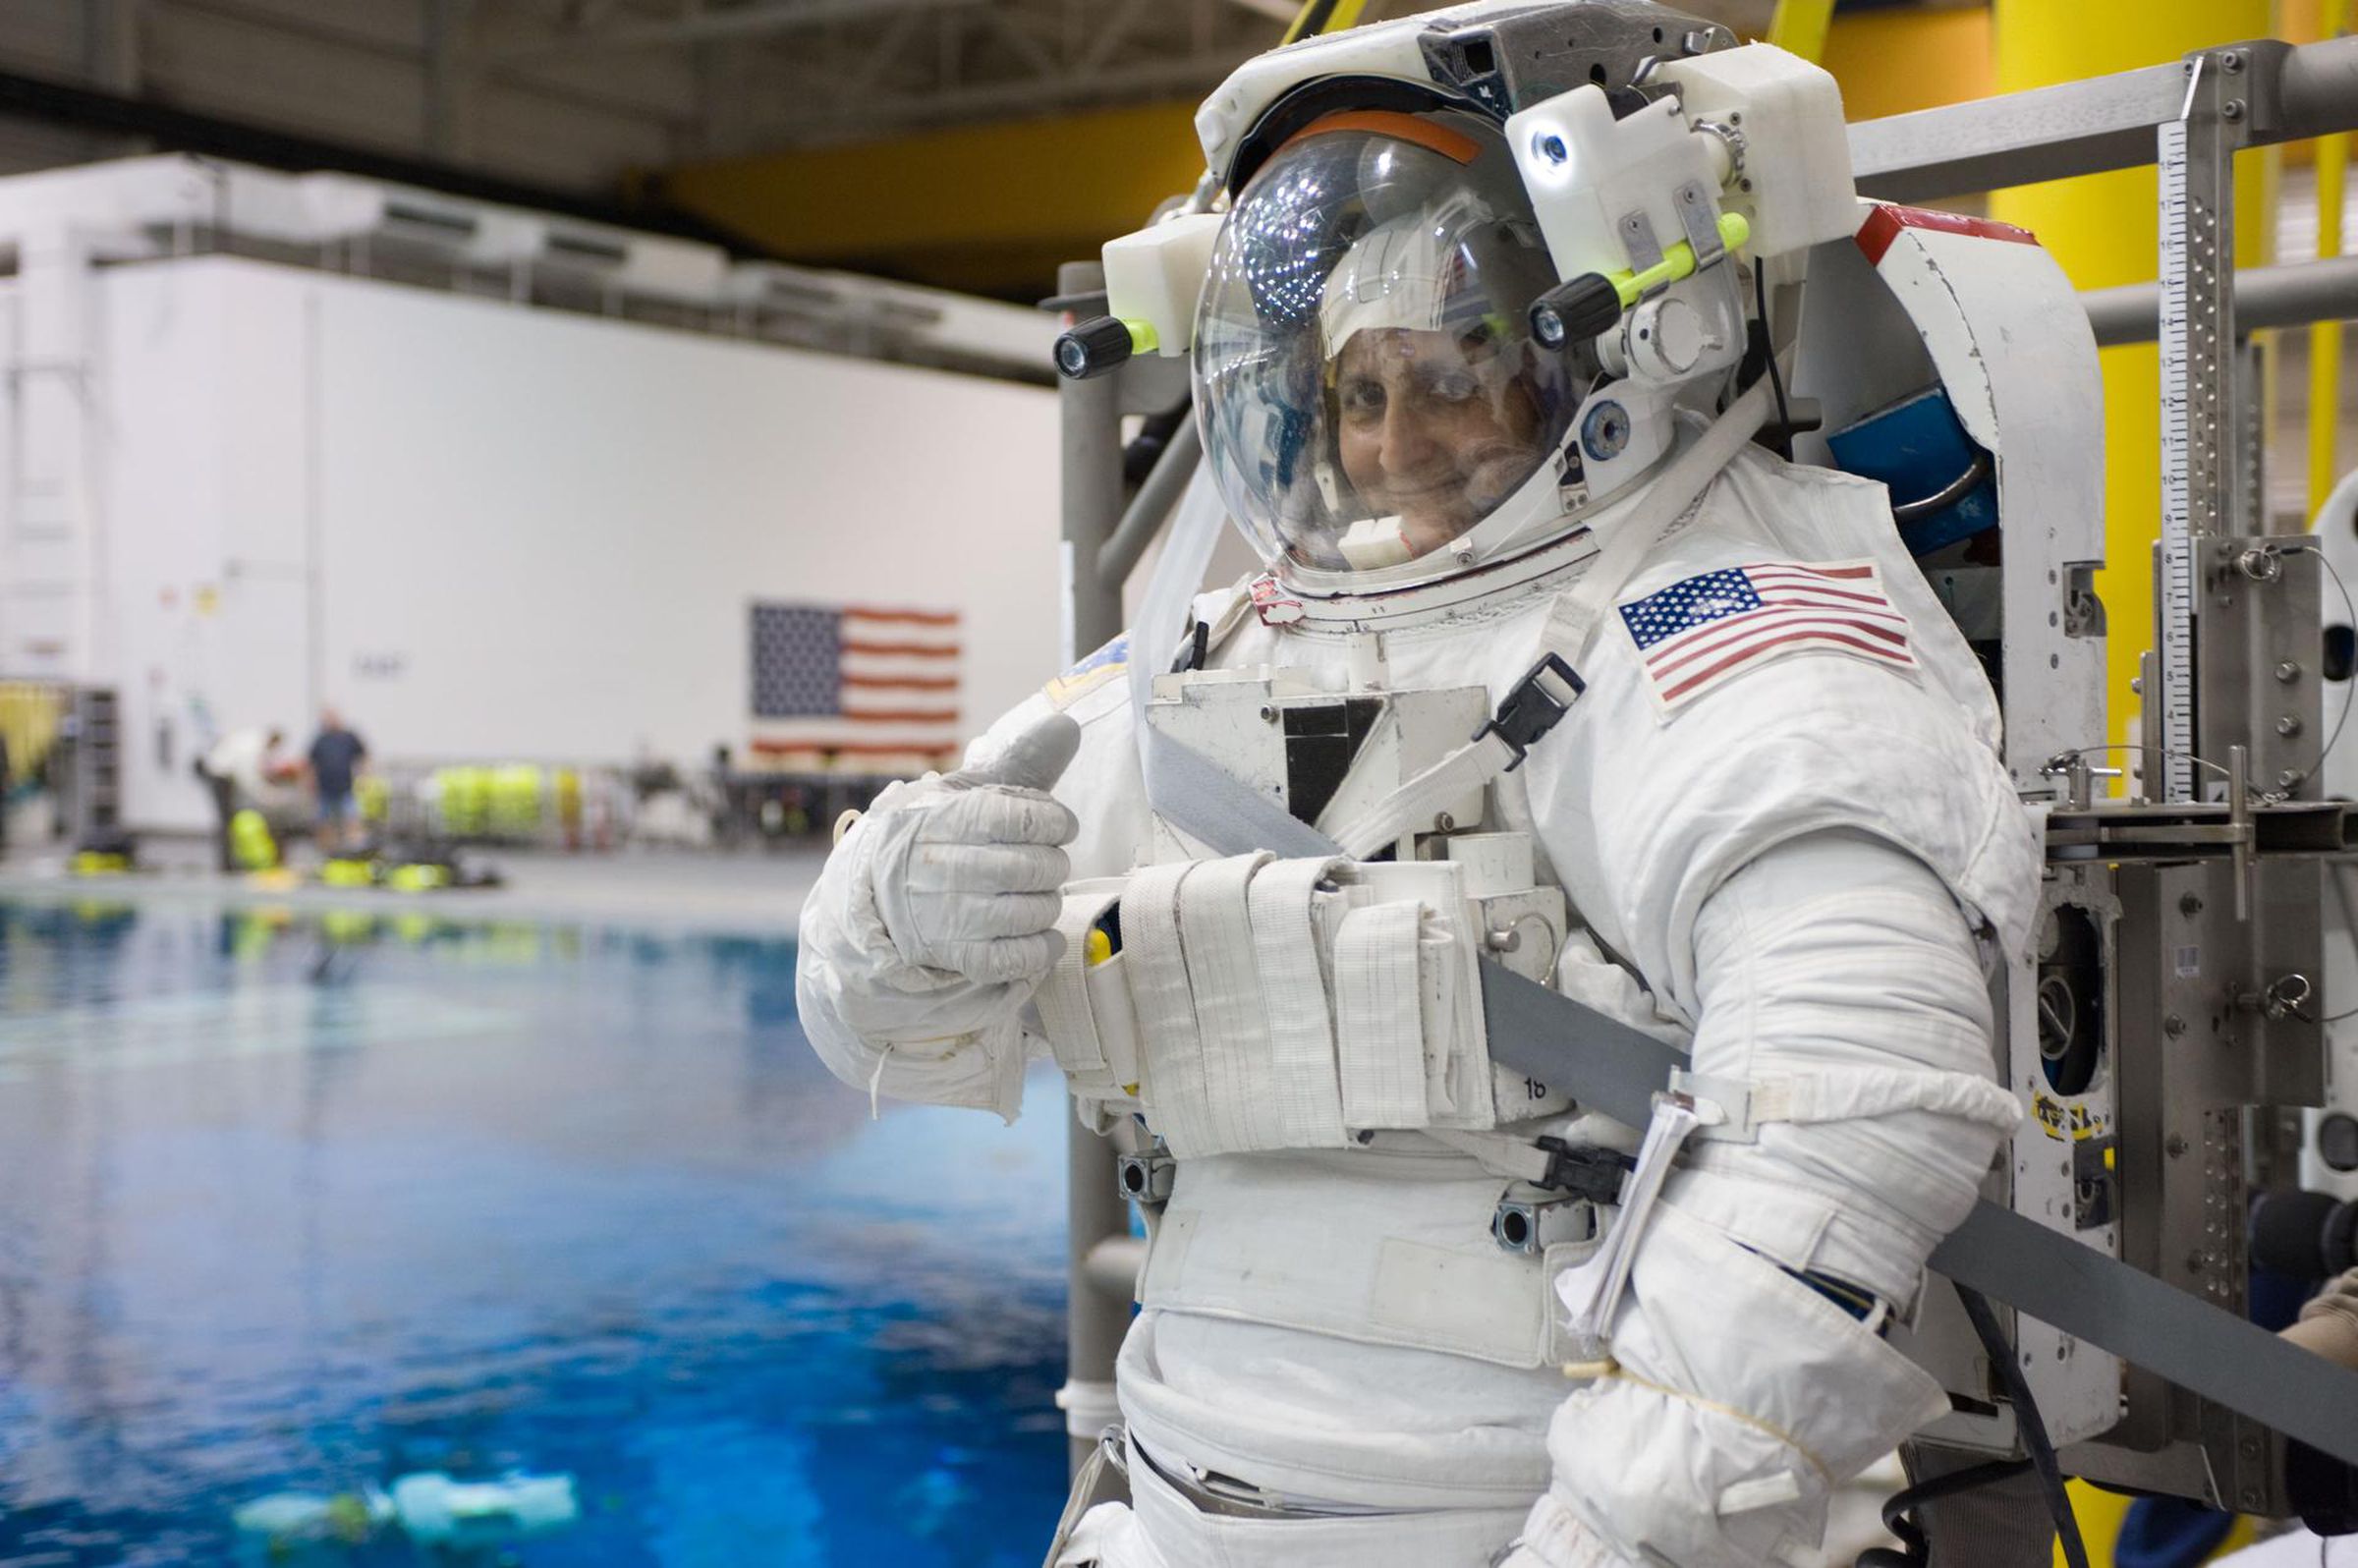 Williams training at the Neutral Buoyancy Lab in Houston